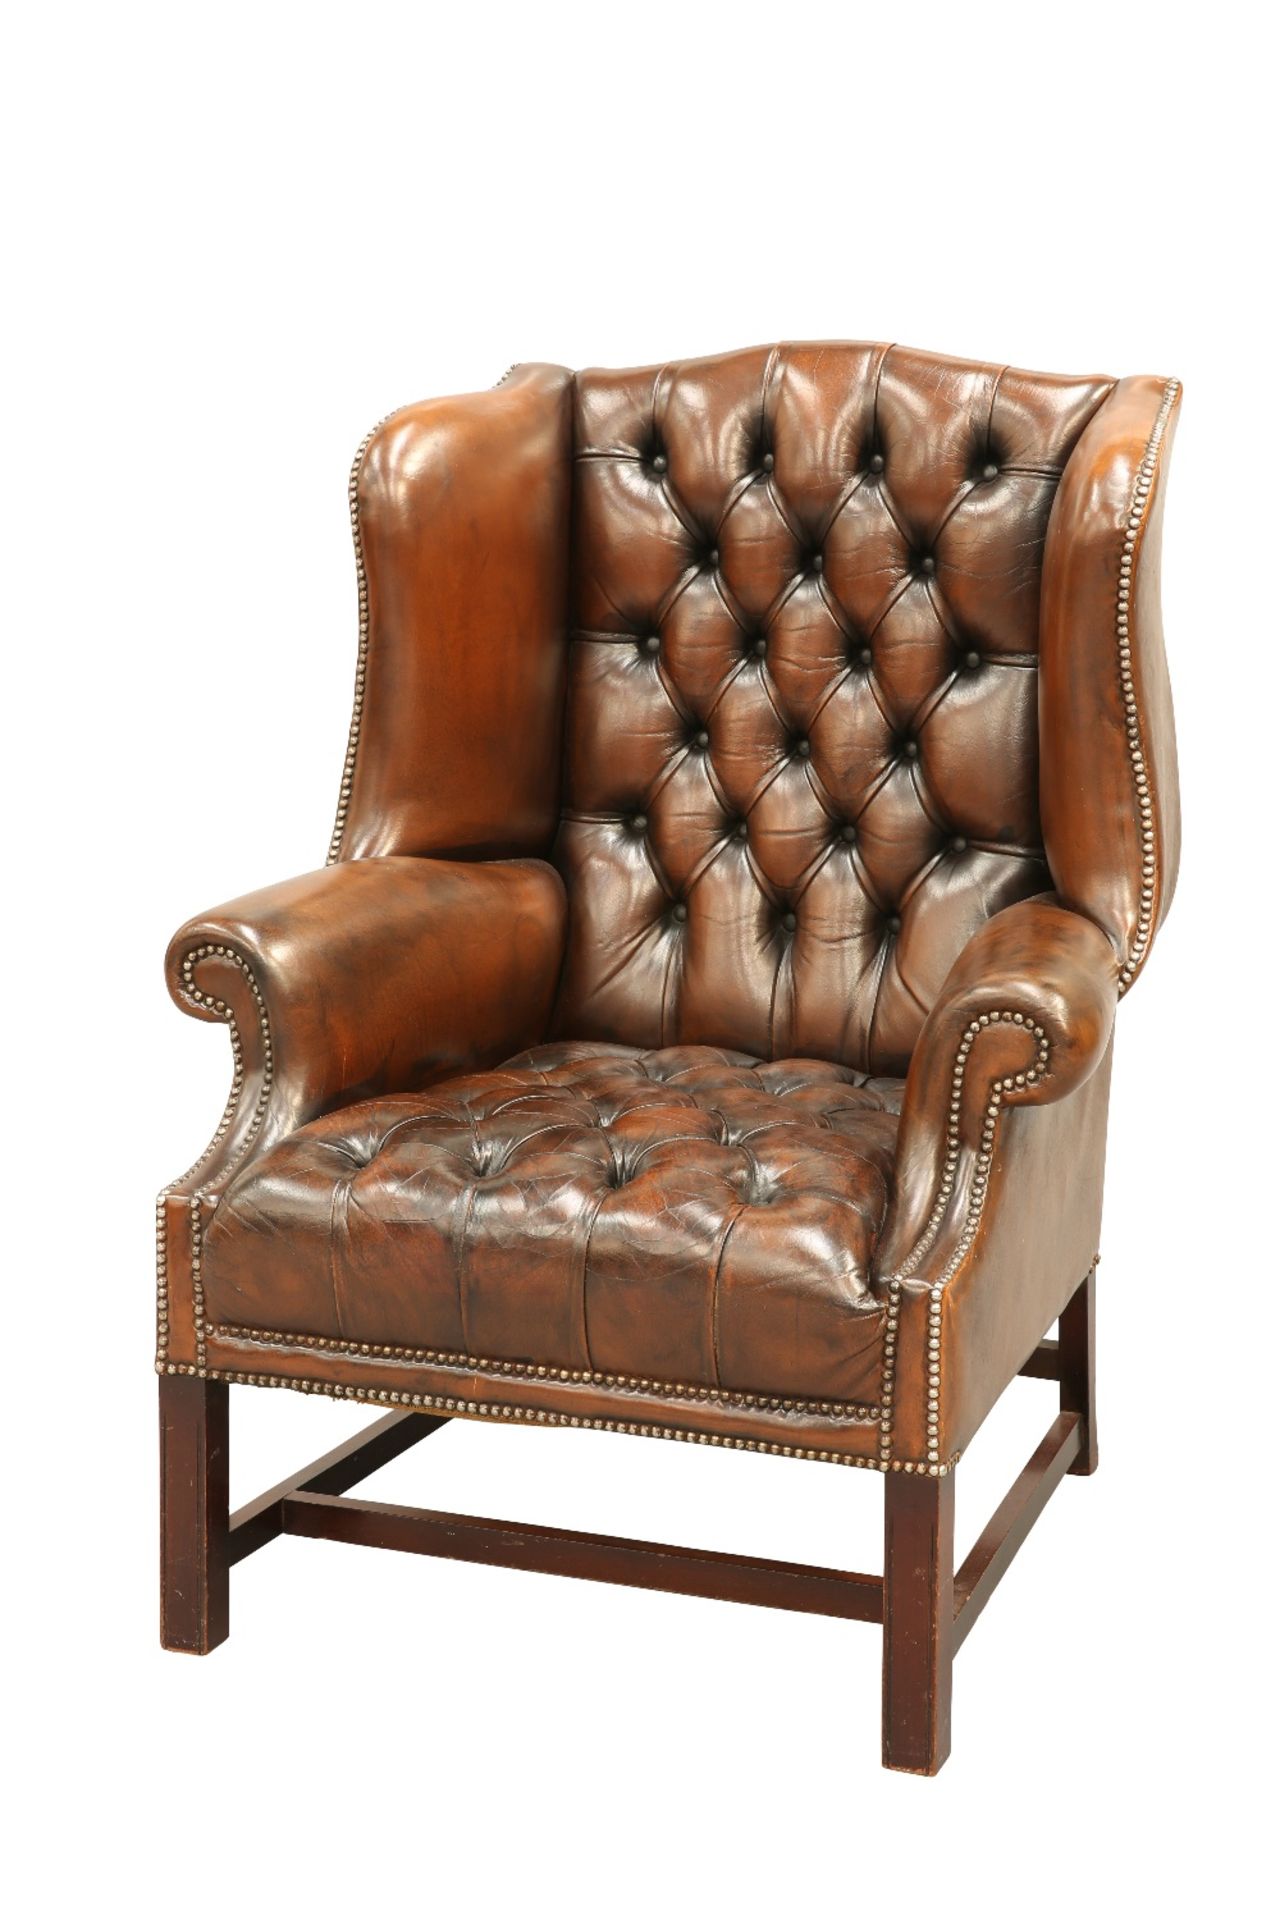 A HANDSOME DEEP-BUTTONED BROWN LEATHER WING CHAIR